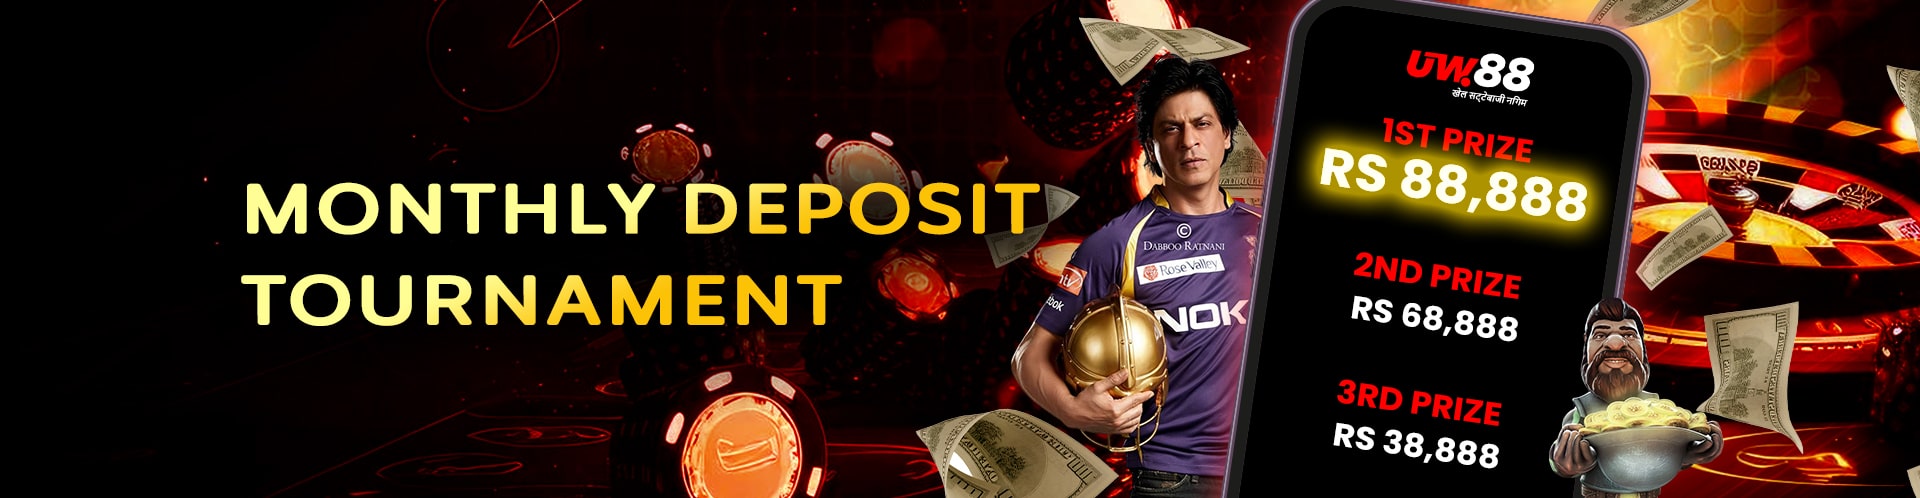 Promotion Banner - Monthly Deposit Tournament